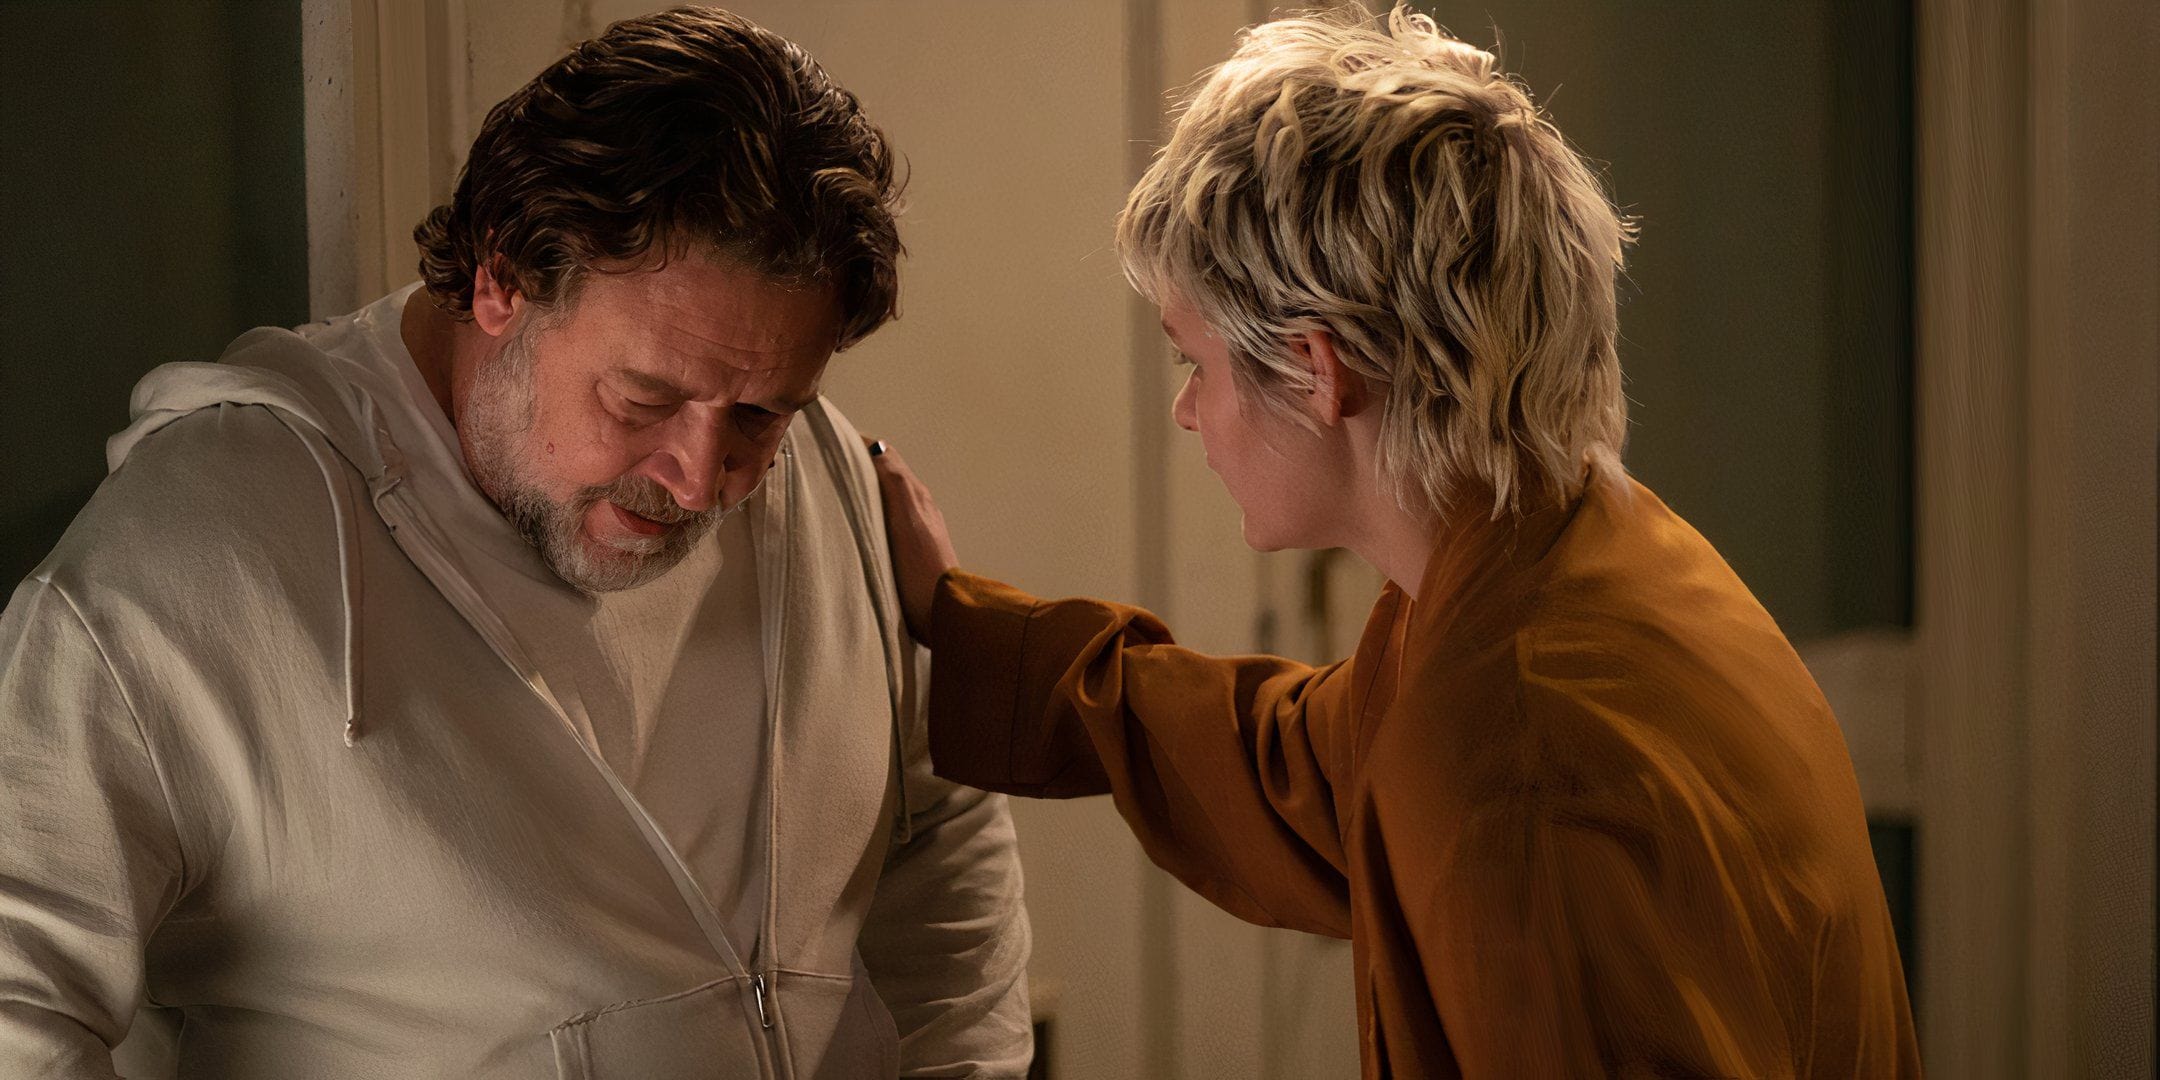 Russell Crowe Leads The Exorcism in a Gripping Supernatural Thriller